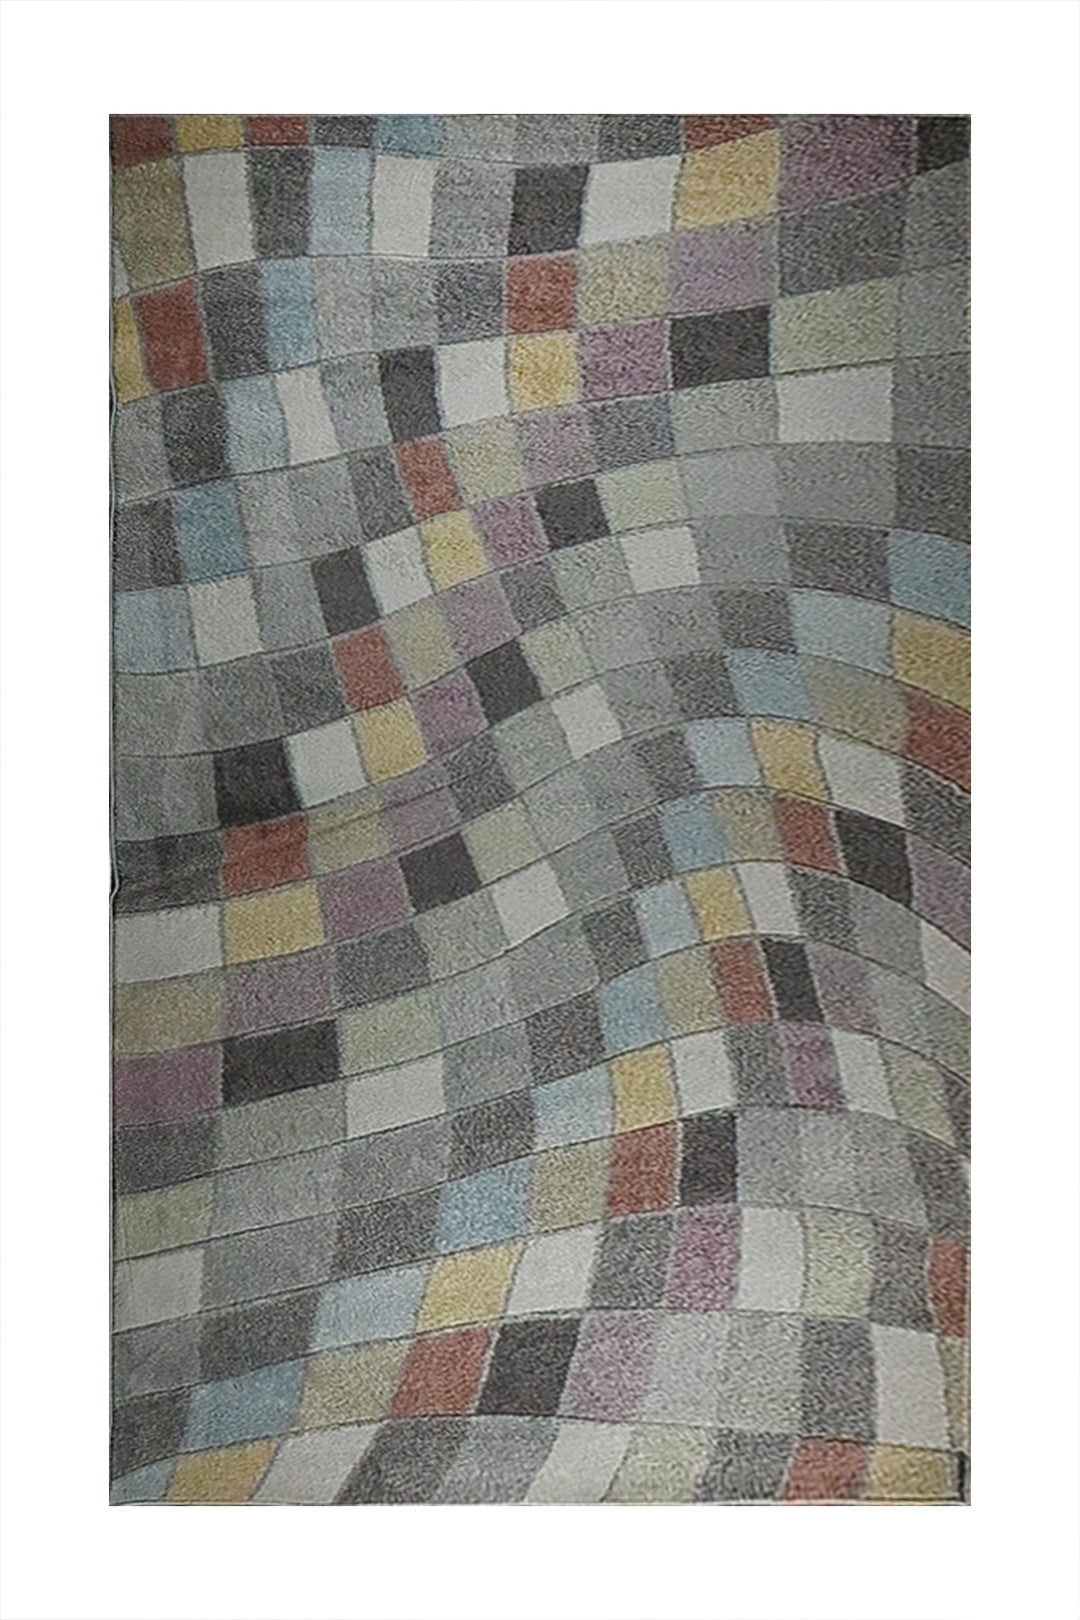 Turkish Modern Emerson Rug -  6.56 x 9.51 FT - Gray -  Superior Comfort, Colorful Design and Modern Style Accent Rugs